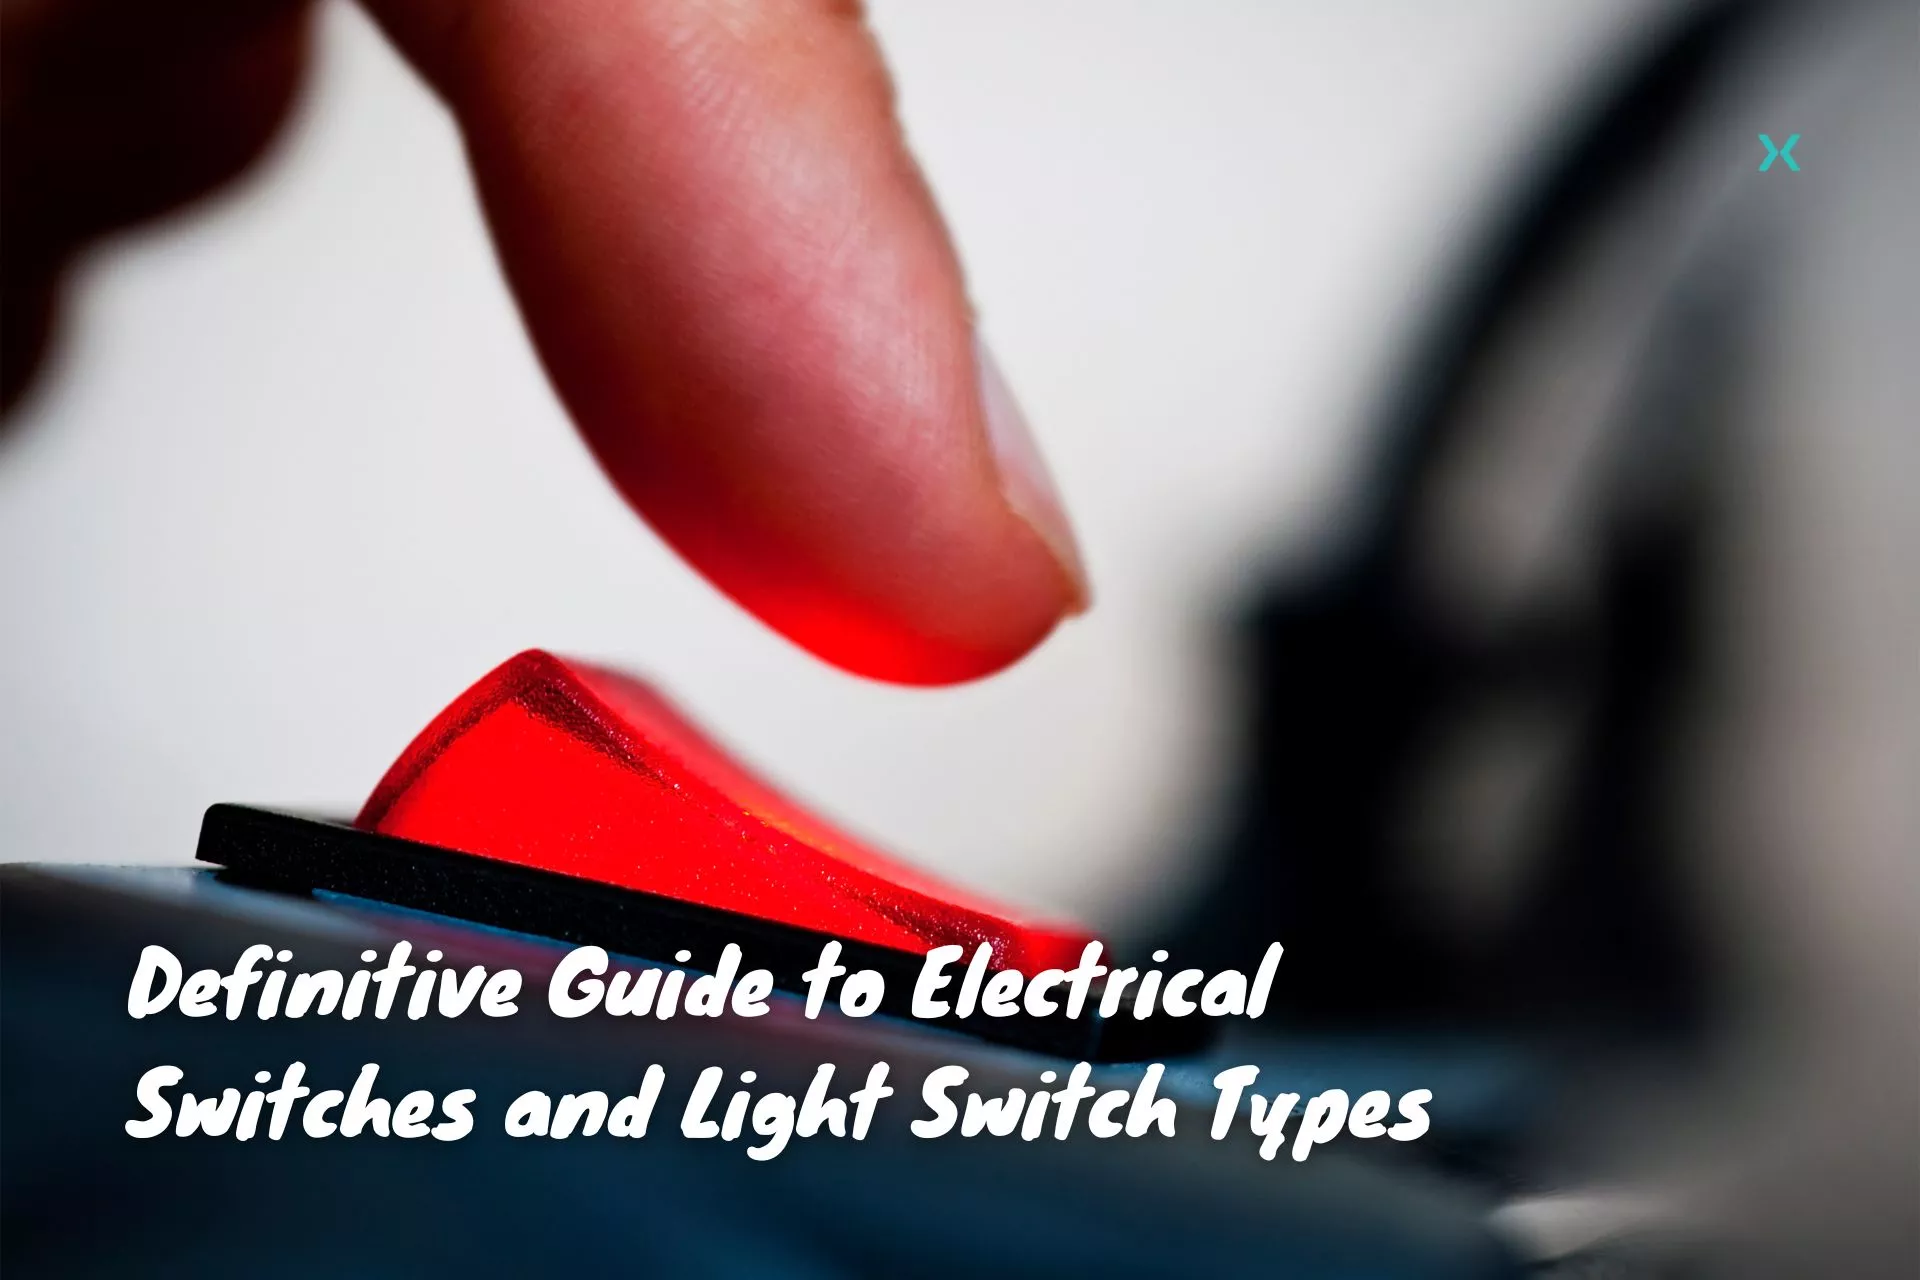 Definitive Guide to Electrical Switches and Light Switch Types